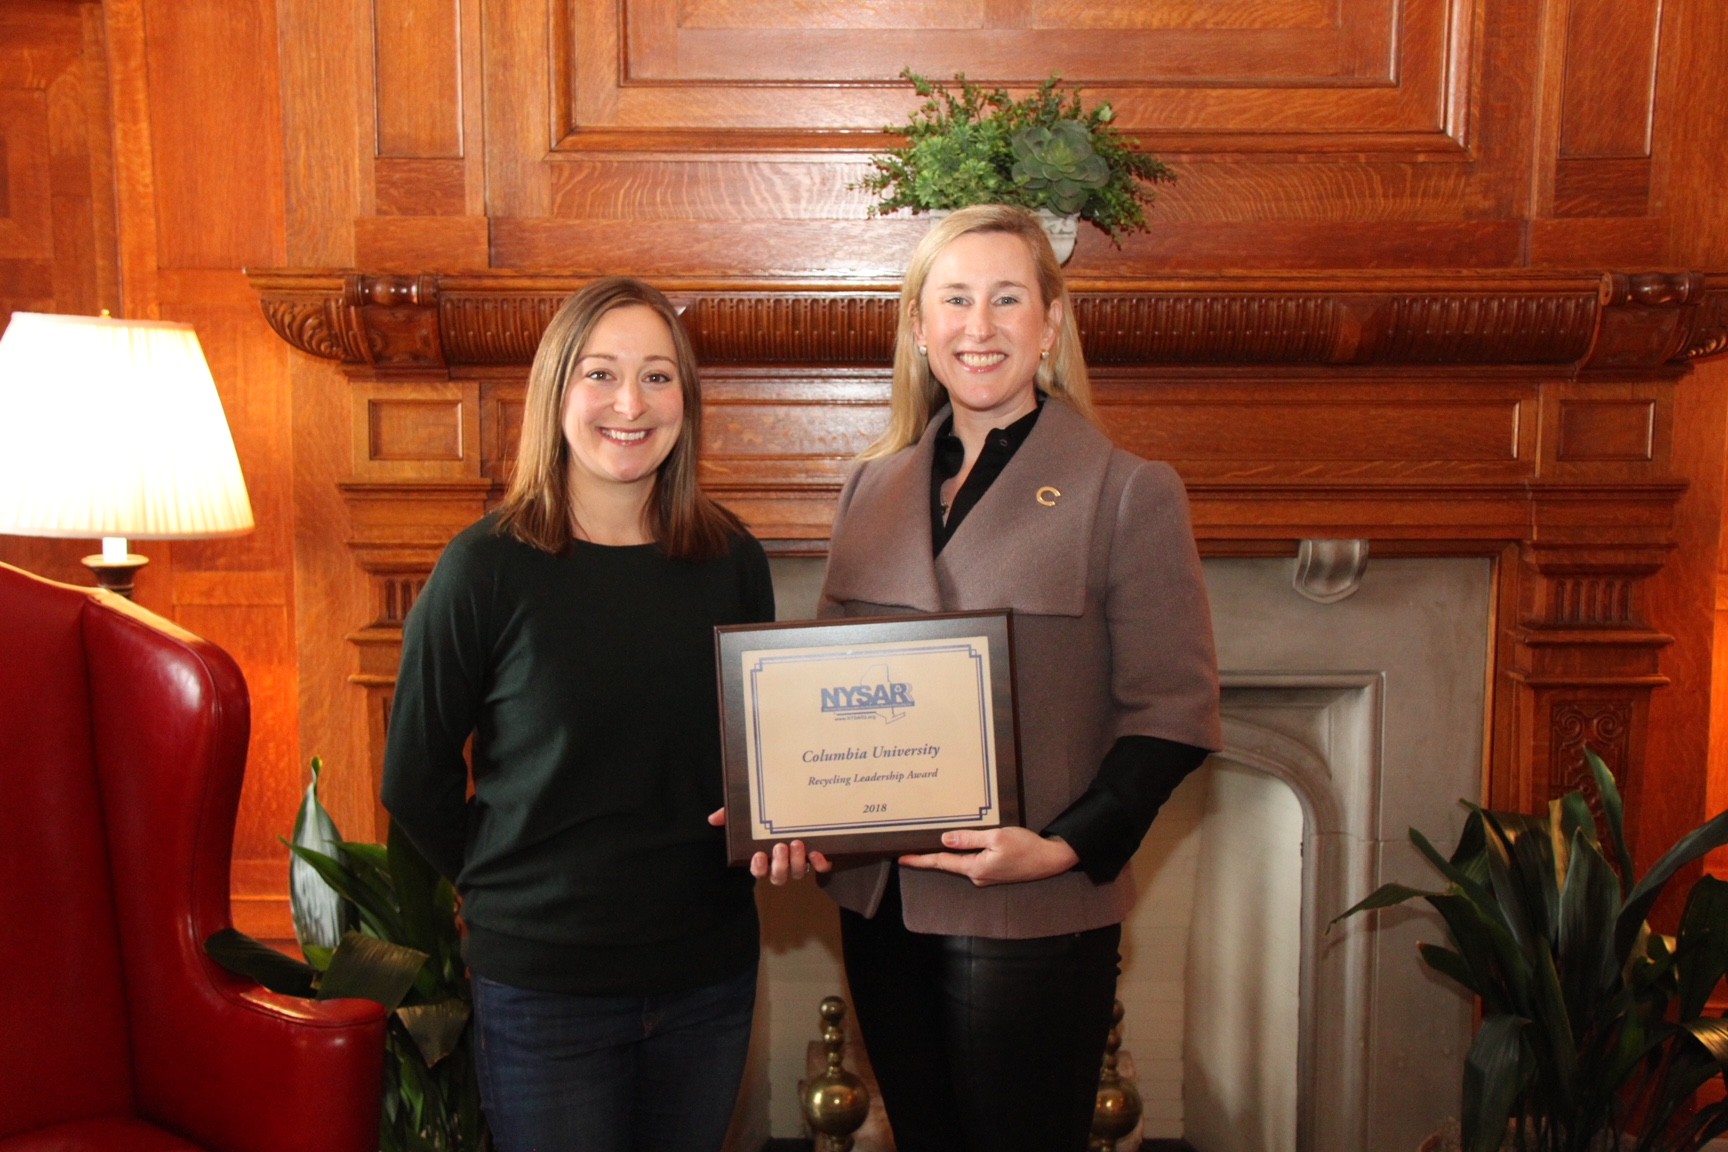 Jessica Prata, Assistant Vice President of the Office of Sustainability for Columbia University, (right) is presented with the 2018 Recycling Leadership Award-College or University by NYSAR3 President Kelli Timbrook.